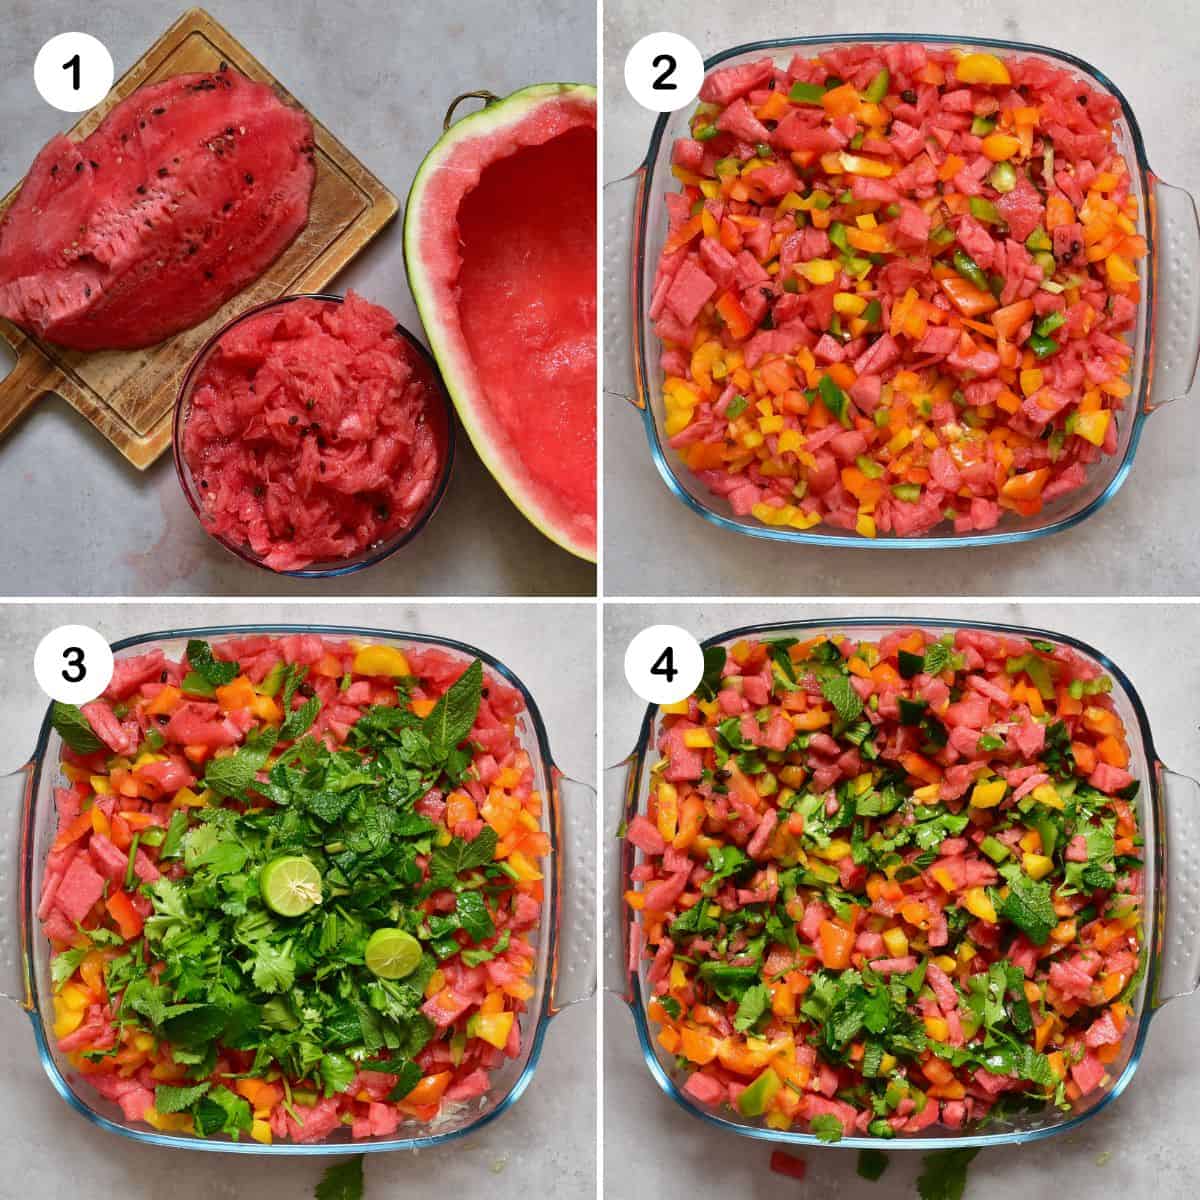 Steps for making watermelon salsa